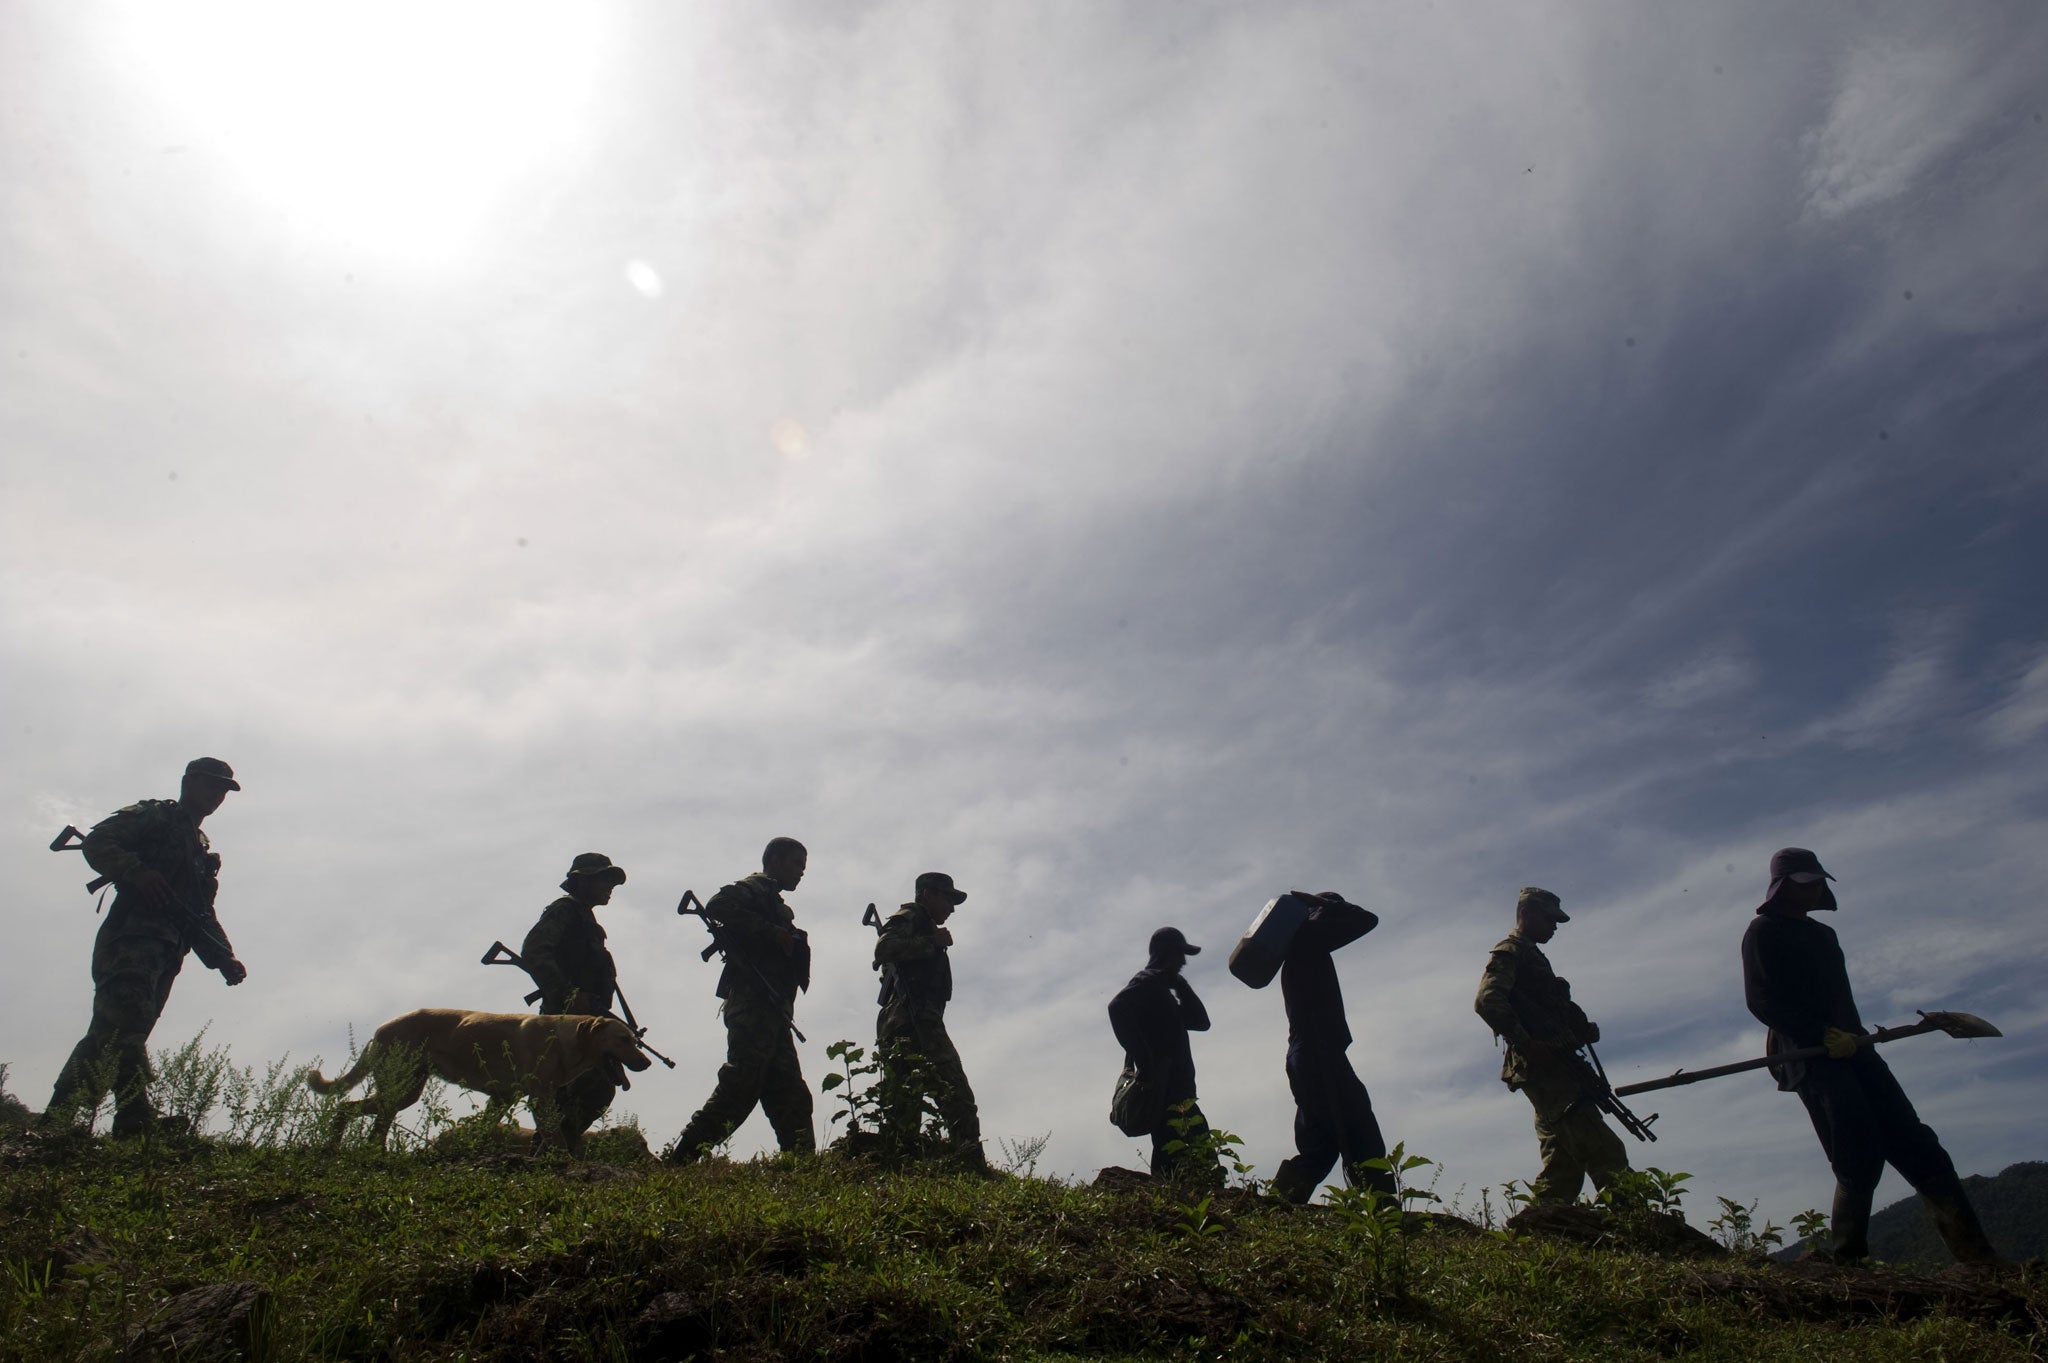 A global scourge: Soldiers and peasants on a coca plantation in the mountains of Colombia